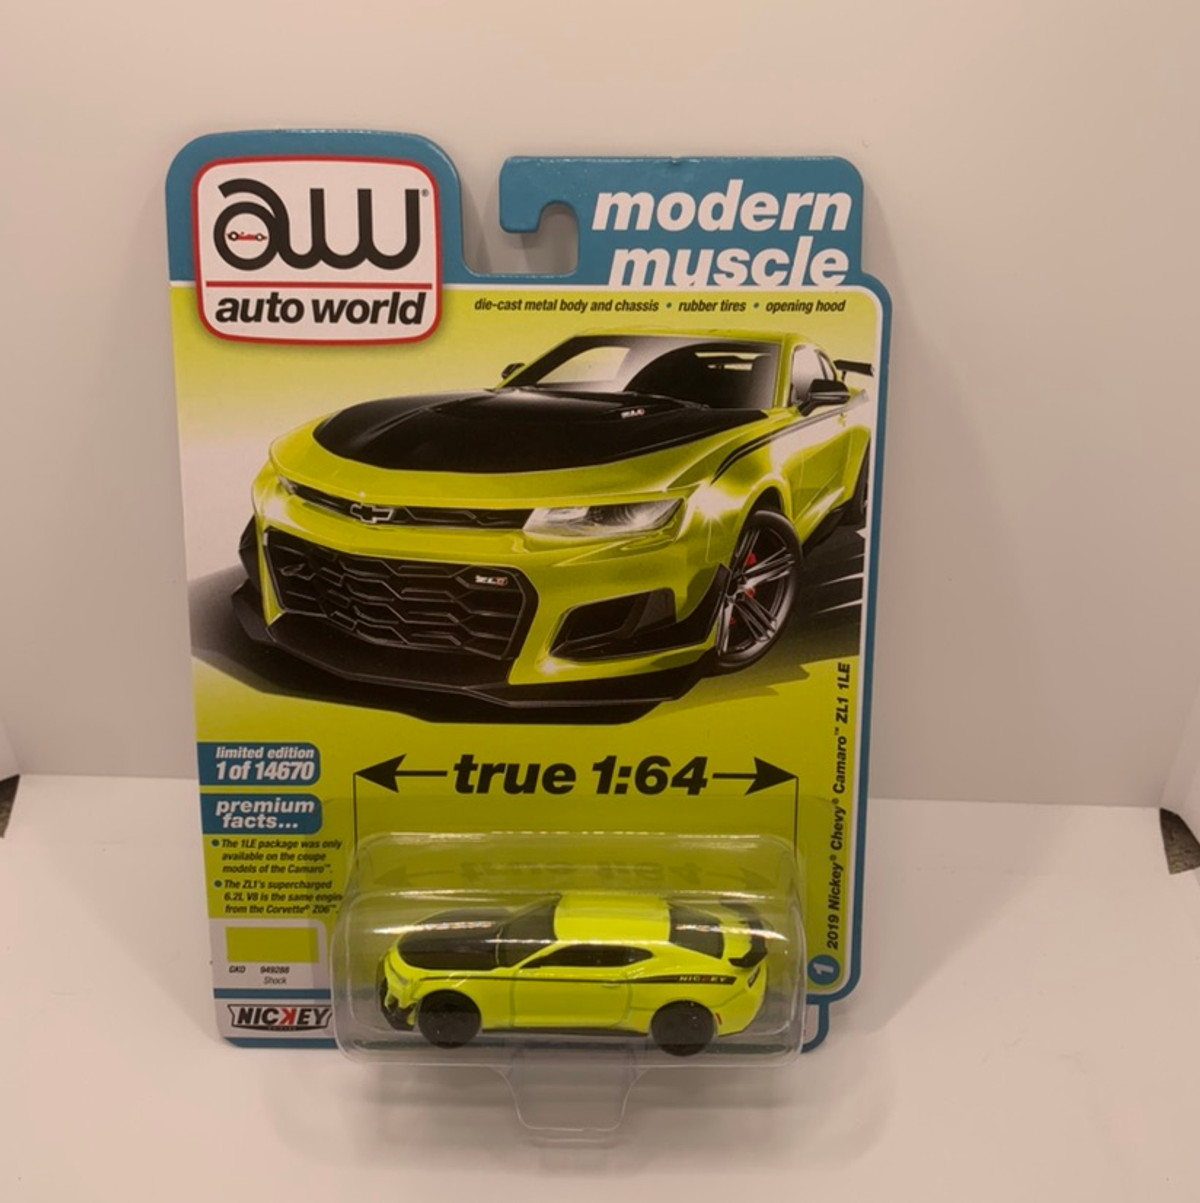 2022 Auto World Modern Muscle 2019 Nickey Chevy Camaro ZL1 1LE Release 1B